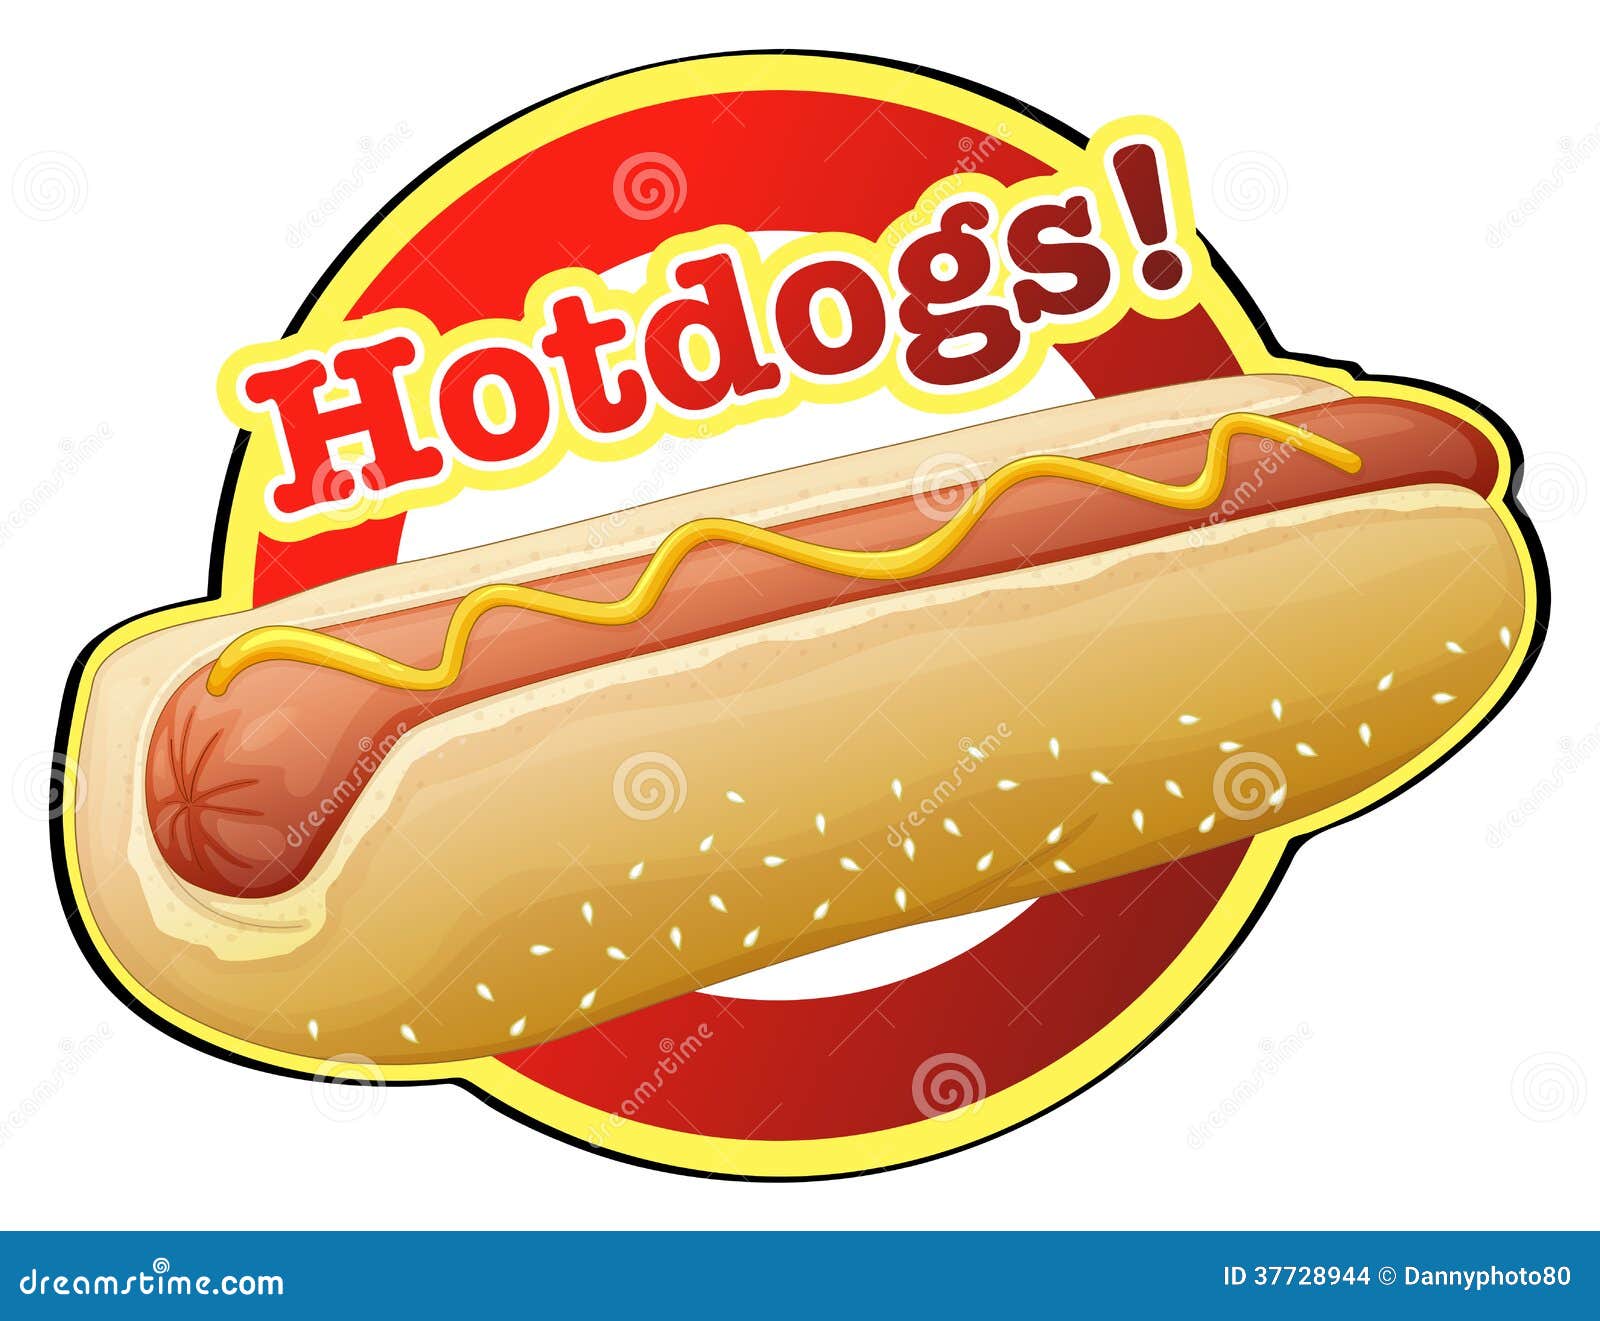 clipart hot dog stand - photo #36